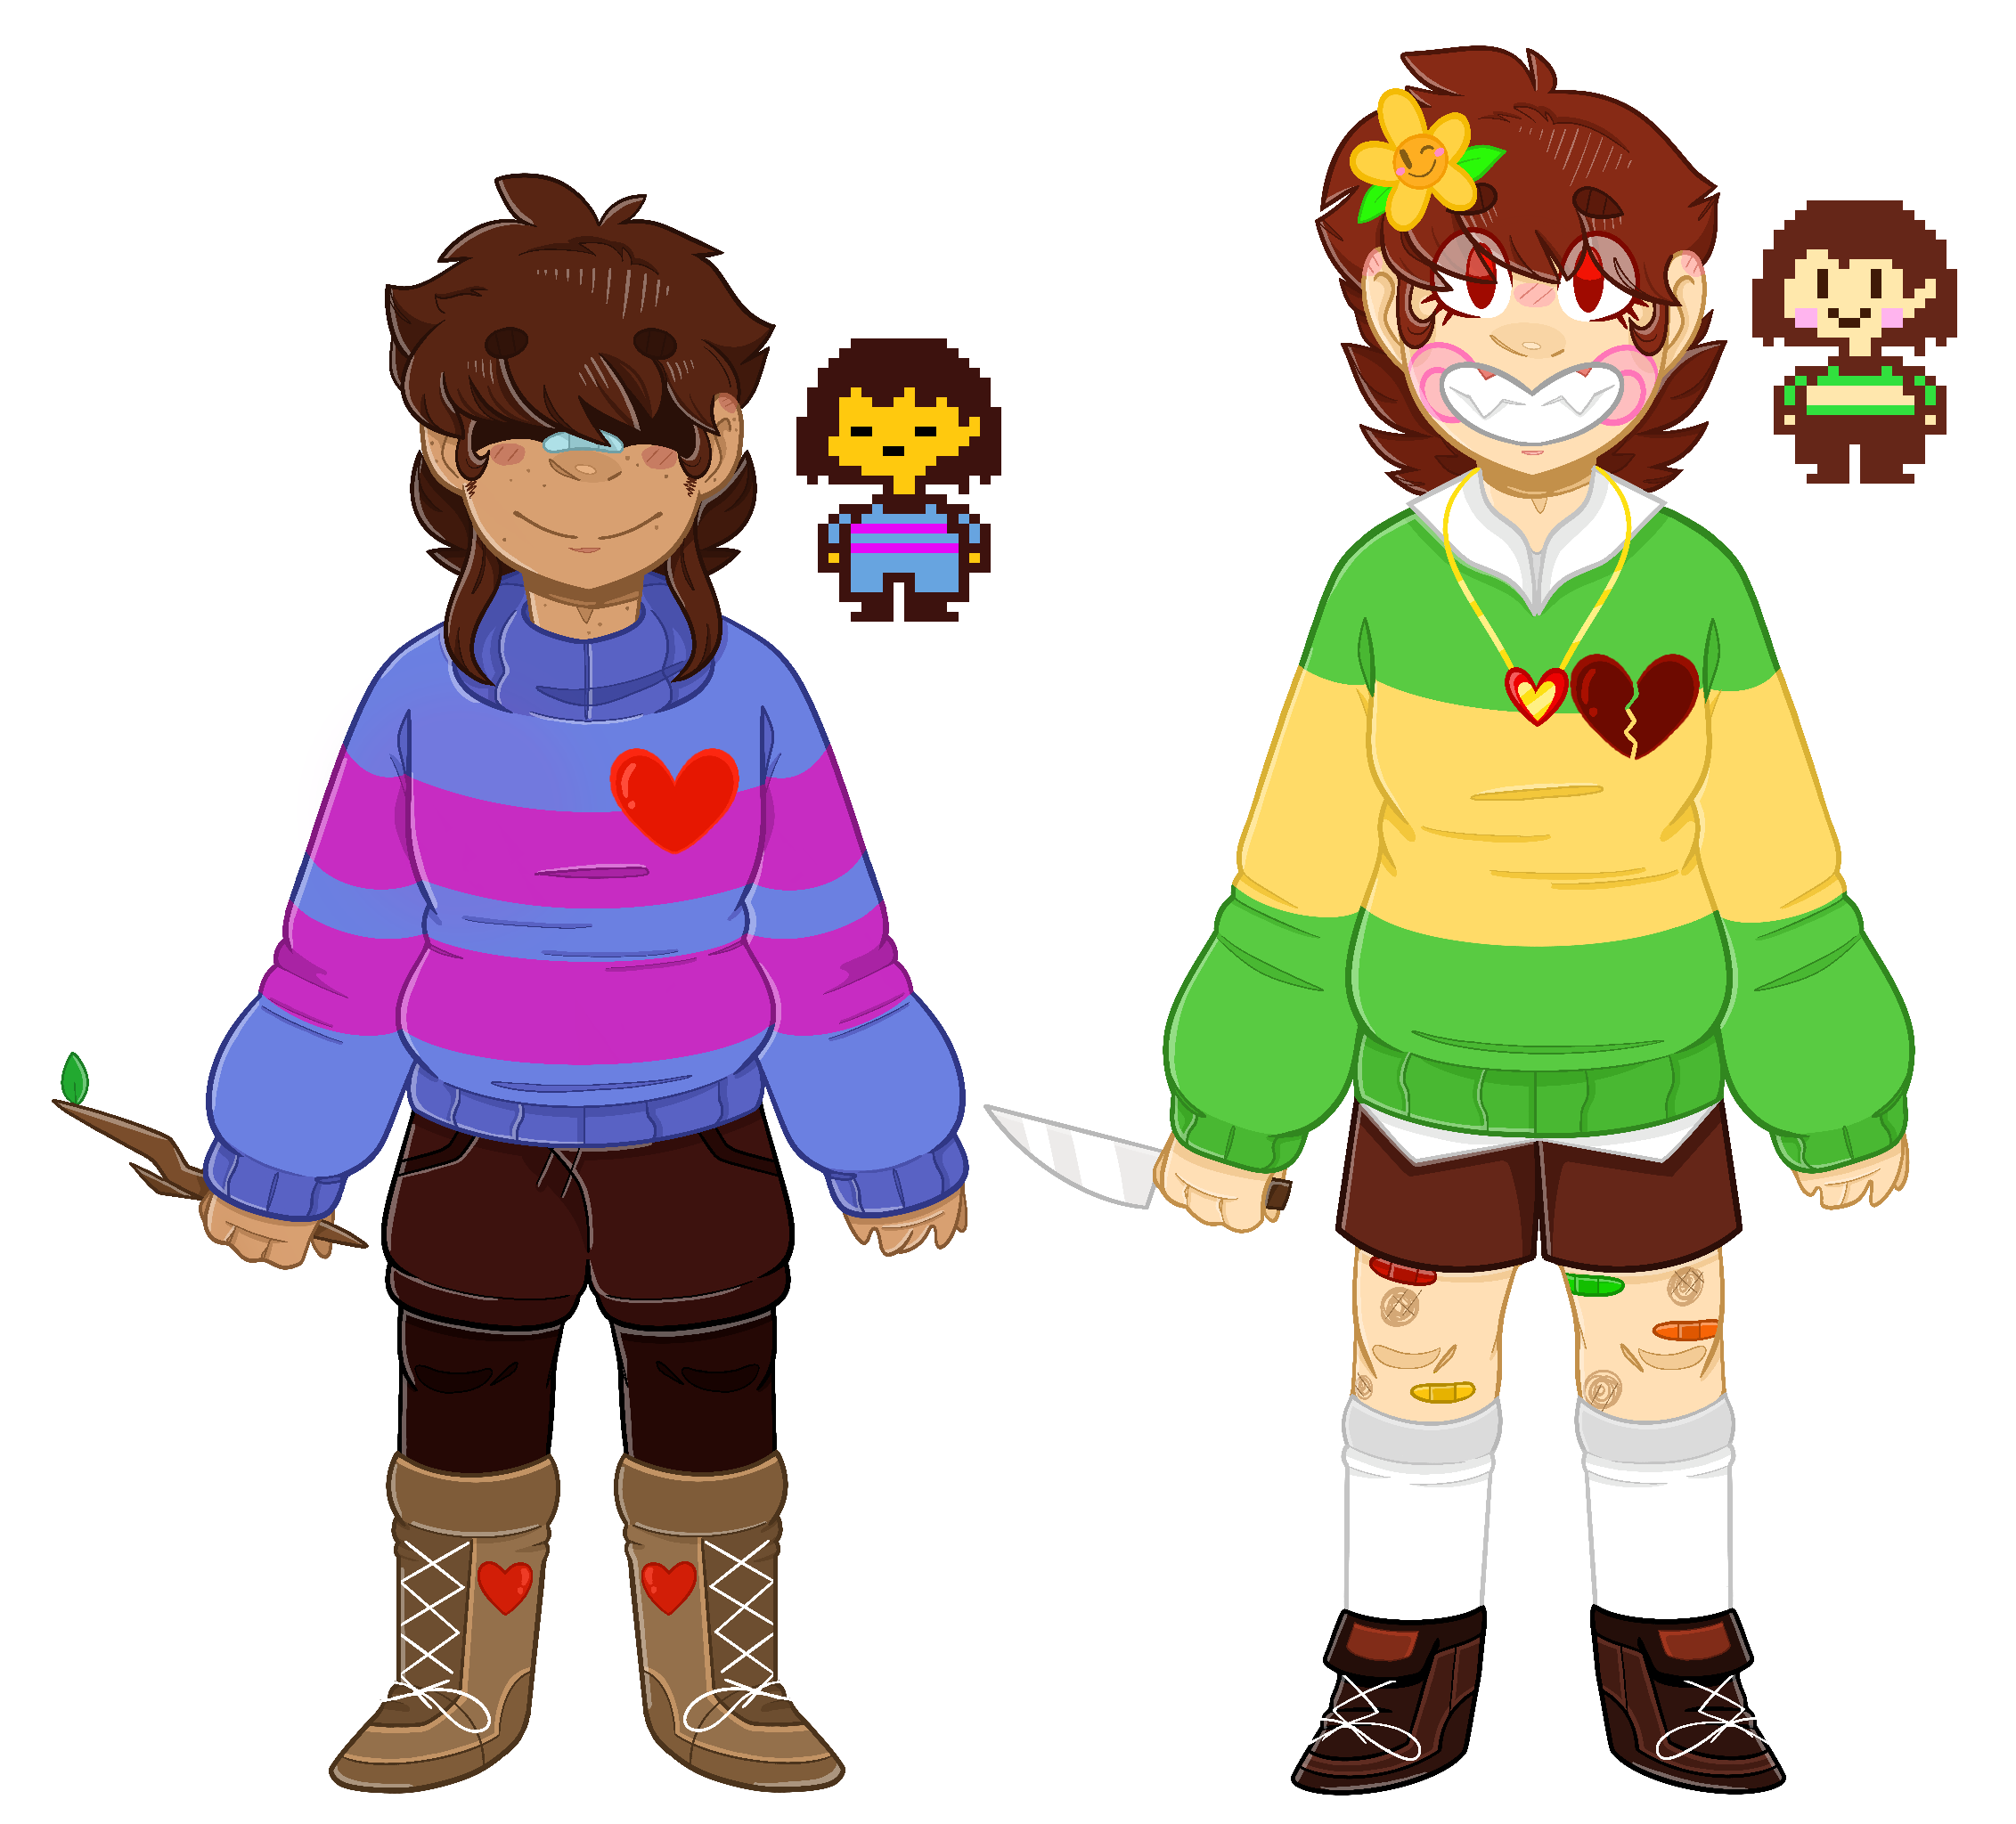 Undertale Chara And Frisk Redesigns By Monkey Overalls On Deviantart